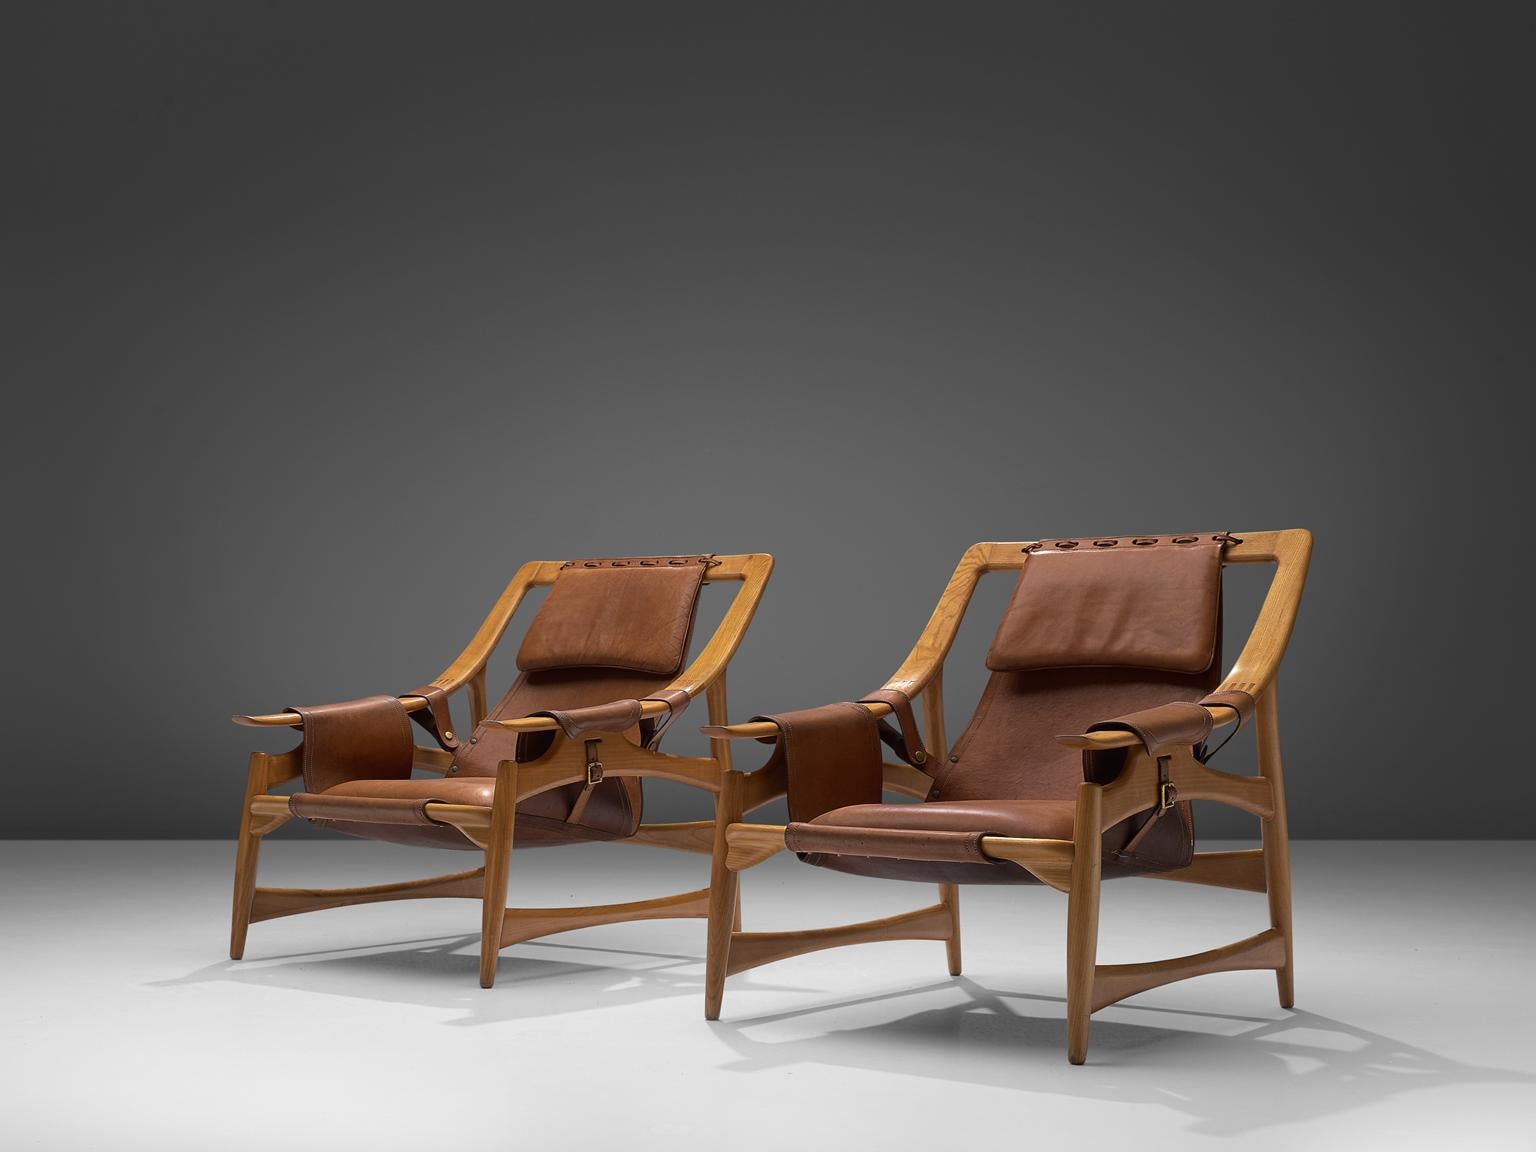 W. Andersag, set of 2 lounge chairs, teak and saddle leather, Italy, 1960s.

These chairs are very dynamic due it's design and shapes. The teak frame shows beautiful lines. The frame and construction reminds of the sturdy hunting chairs. Thick